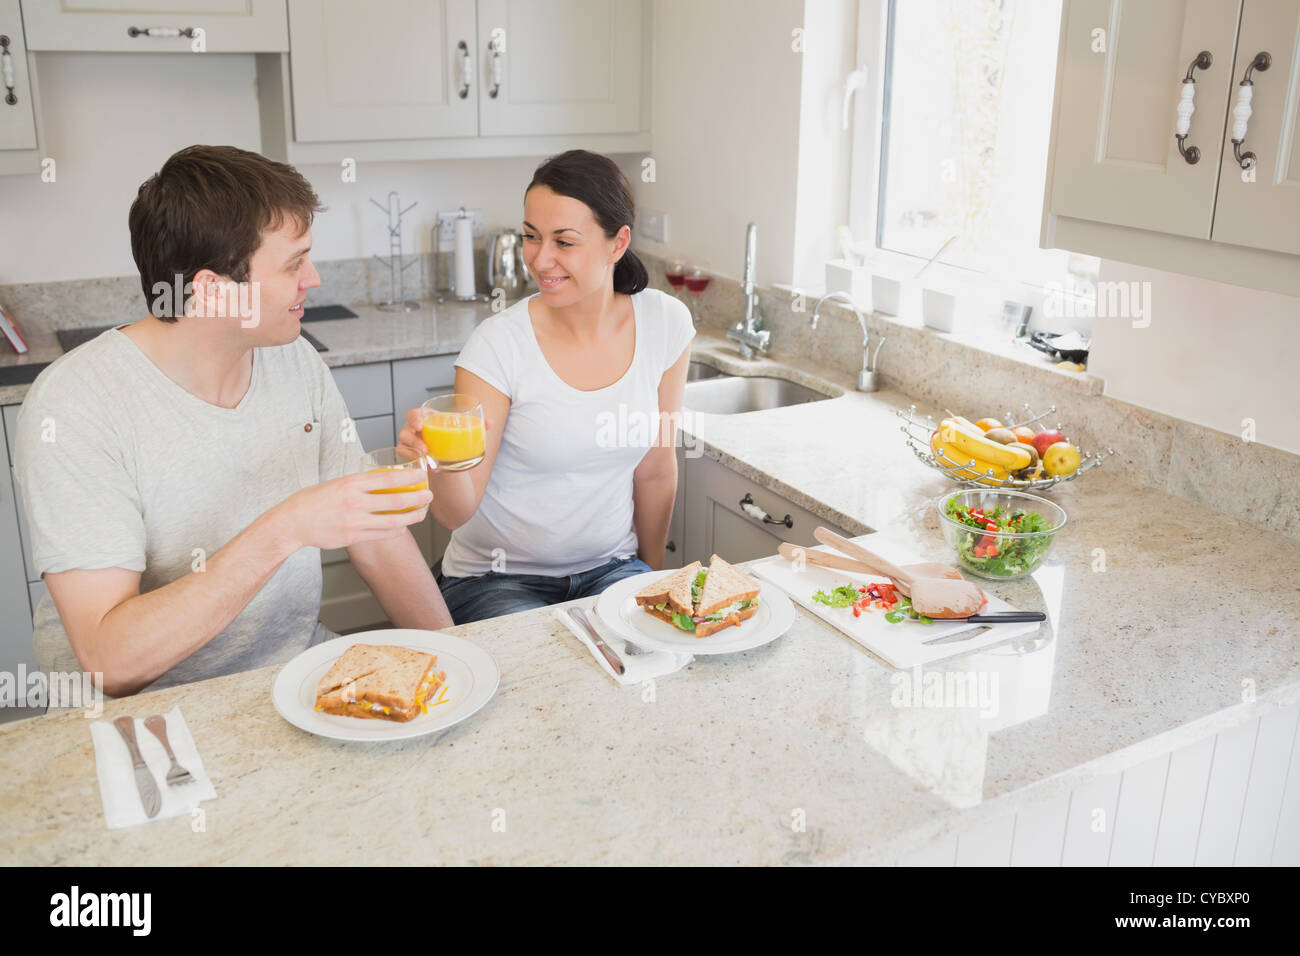 Two people eating and drinking Stock Photo